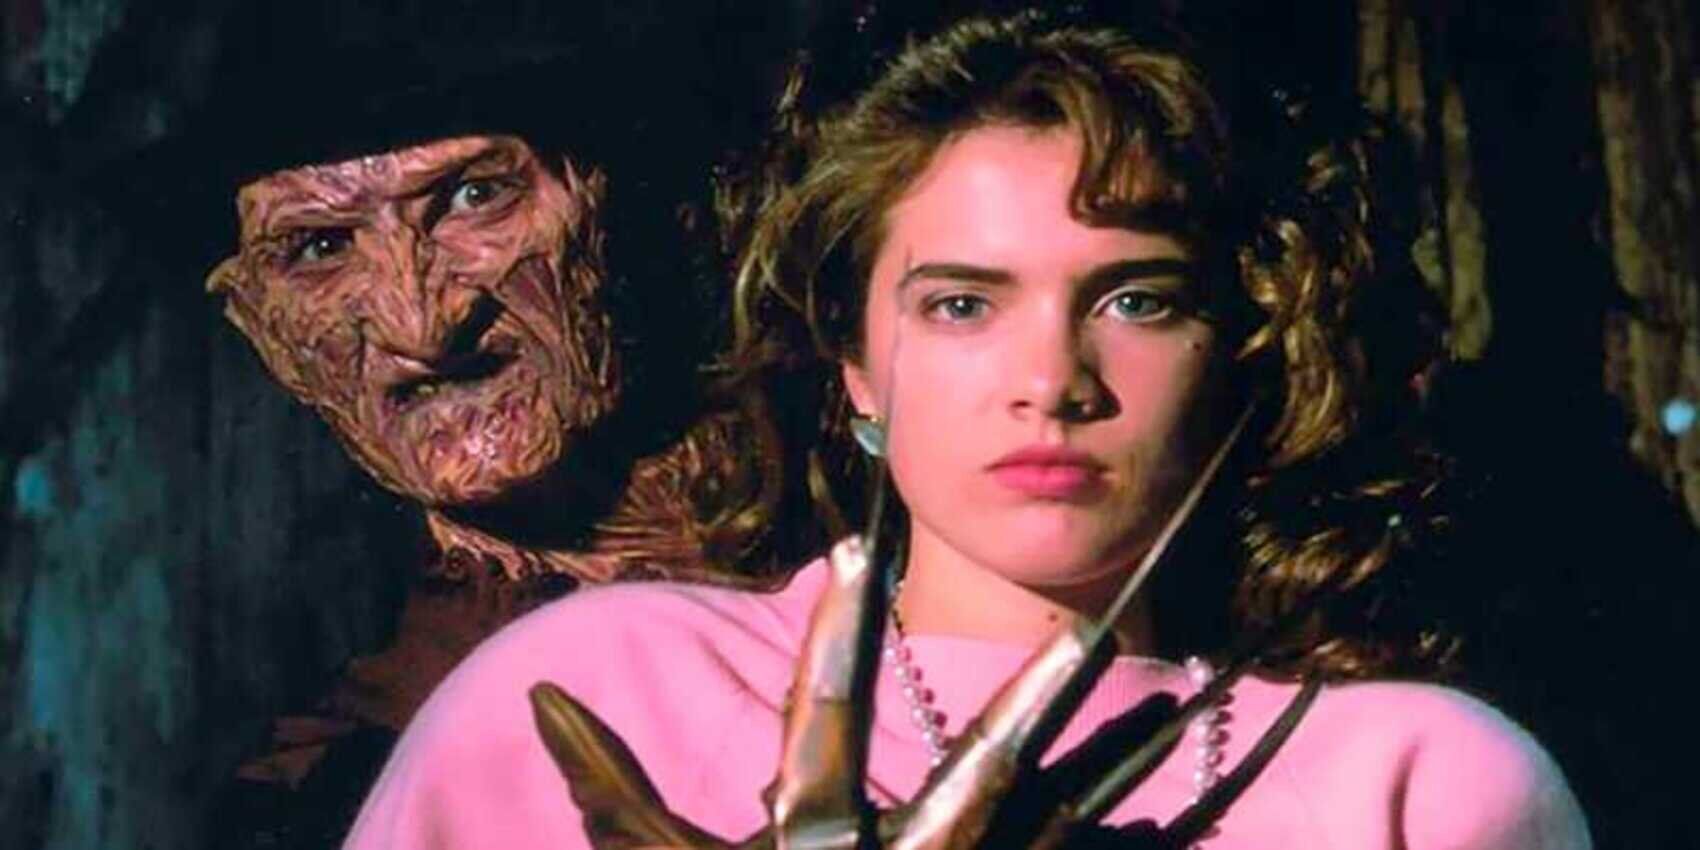 Nancy standing in front of Freddy Krueger, with his clawed hand wrapped around her